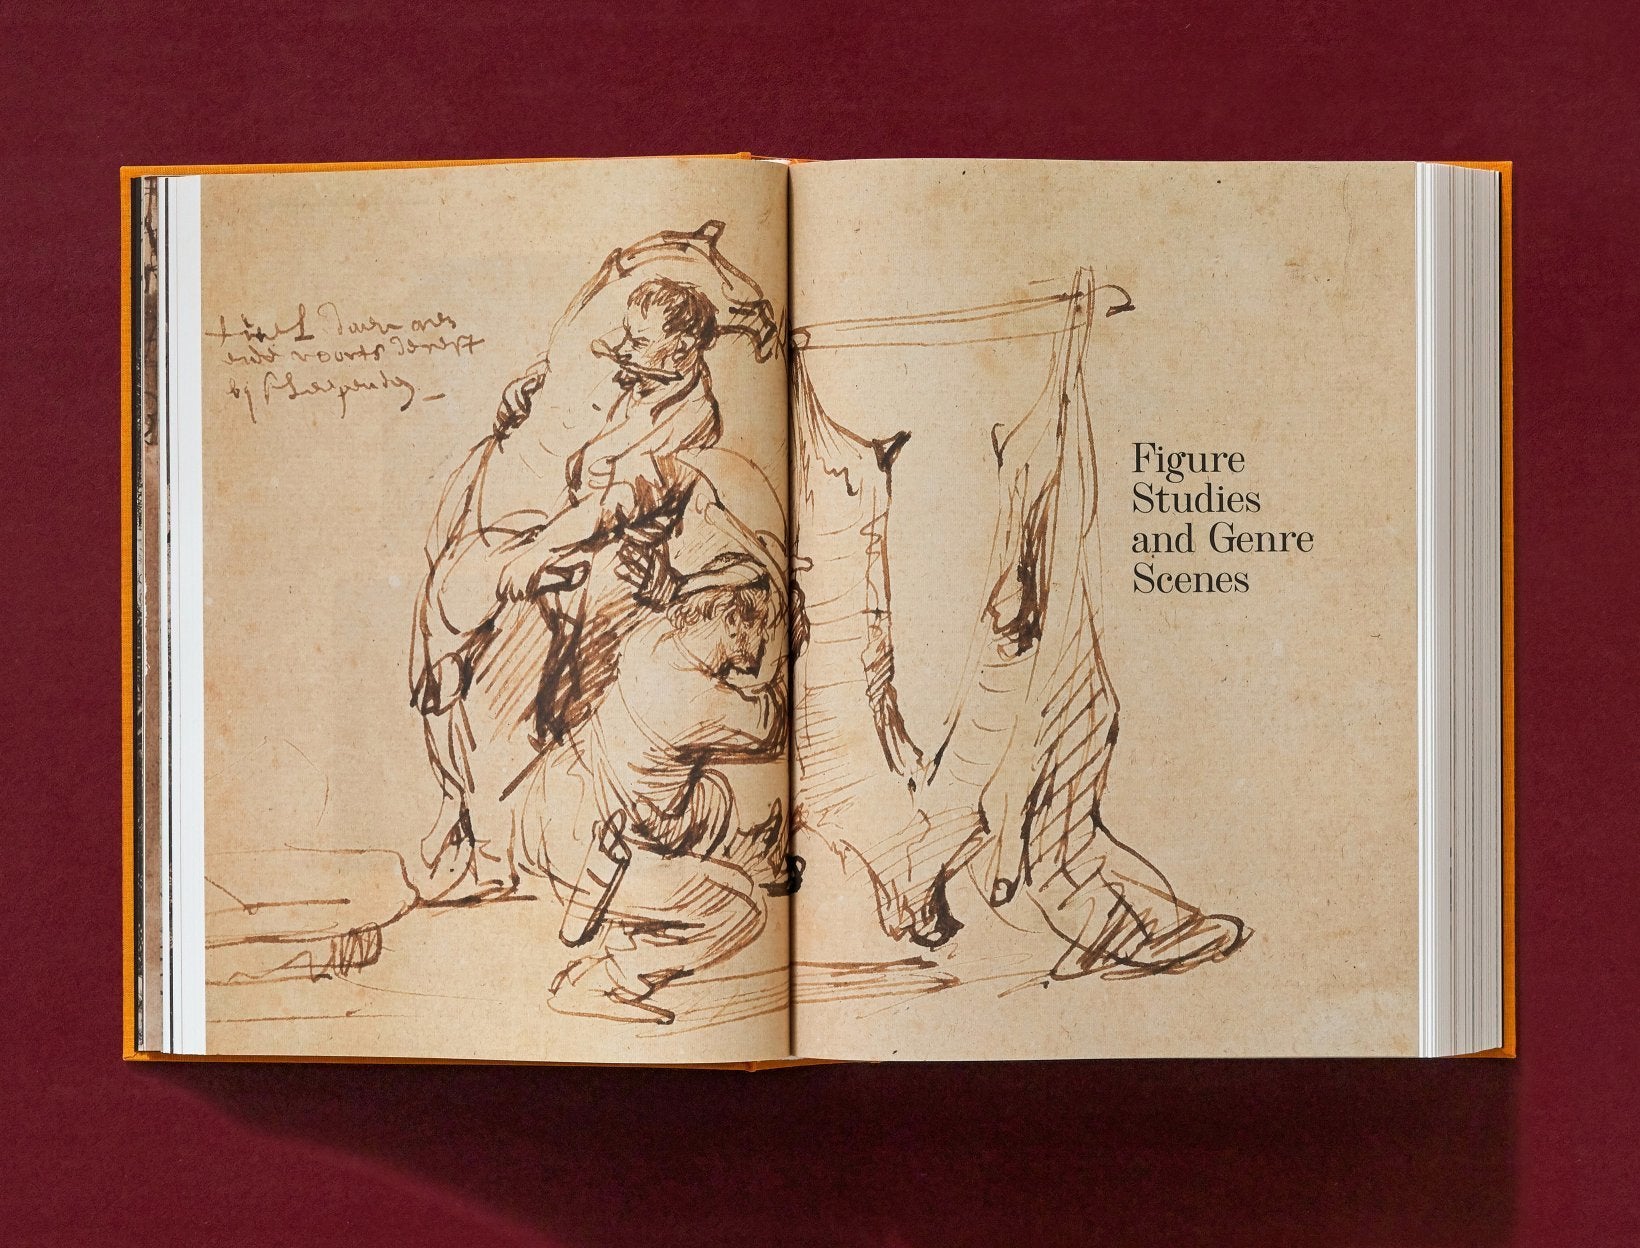 Rembrandt - The Complete Drawings and Etchings